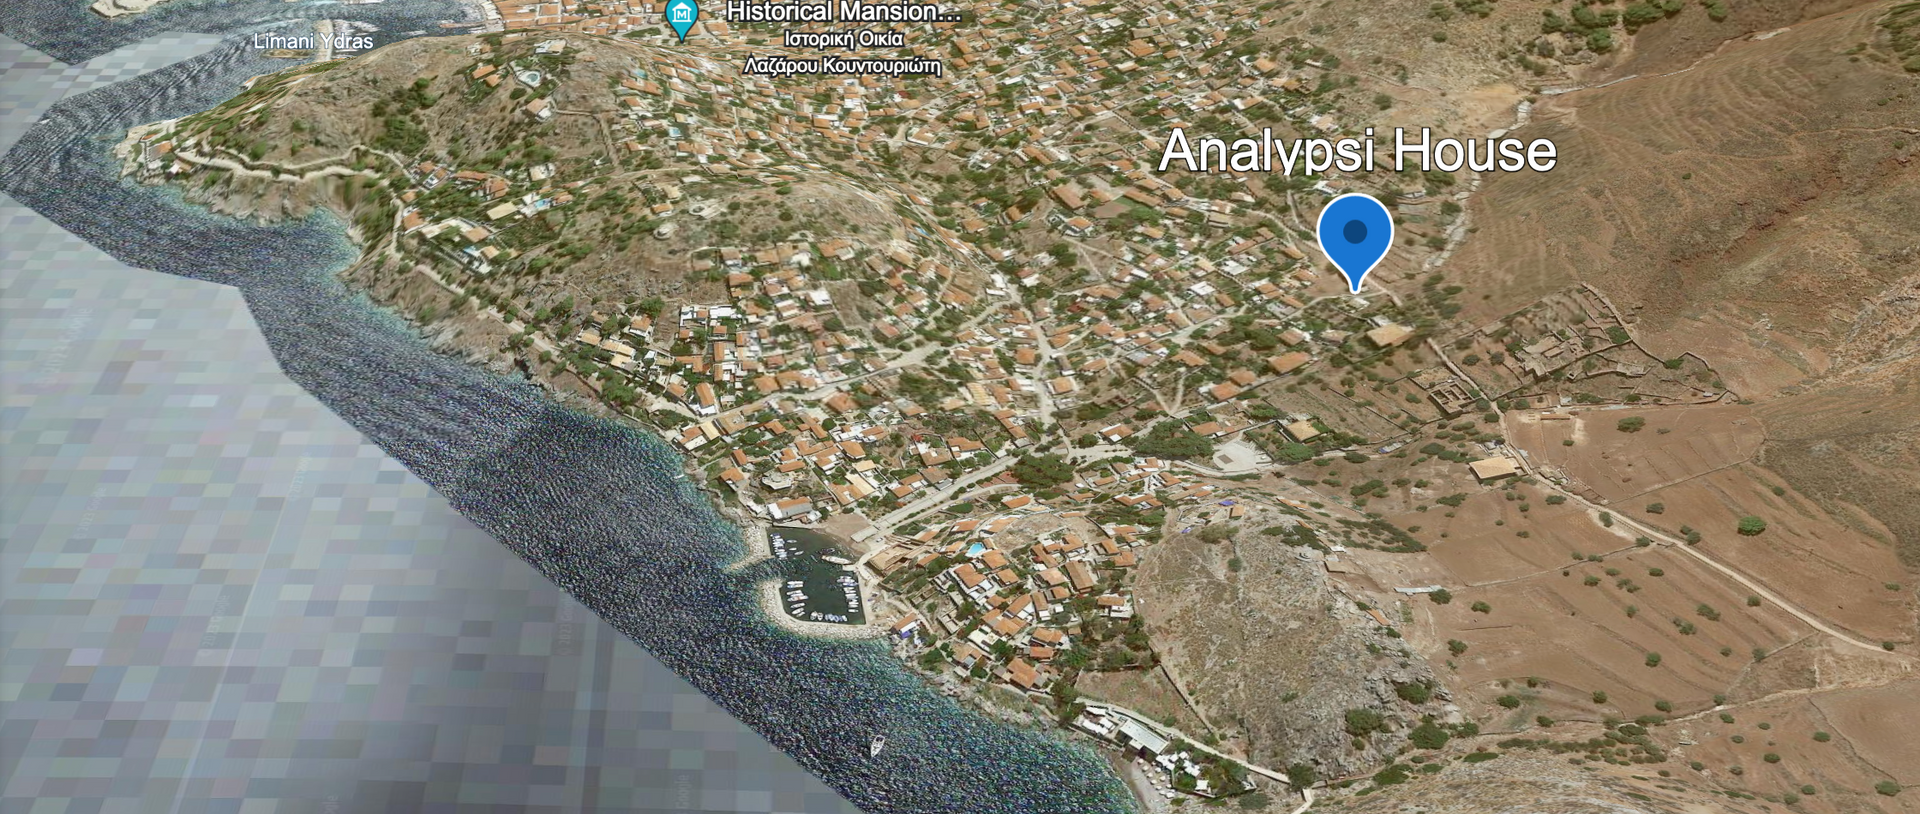 Location Map for Analypsi House on Hydra Island Greece